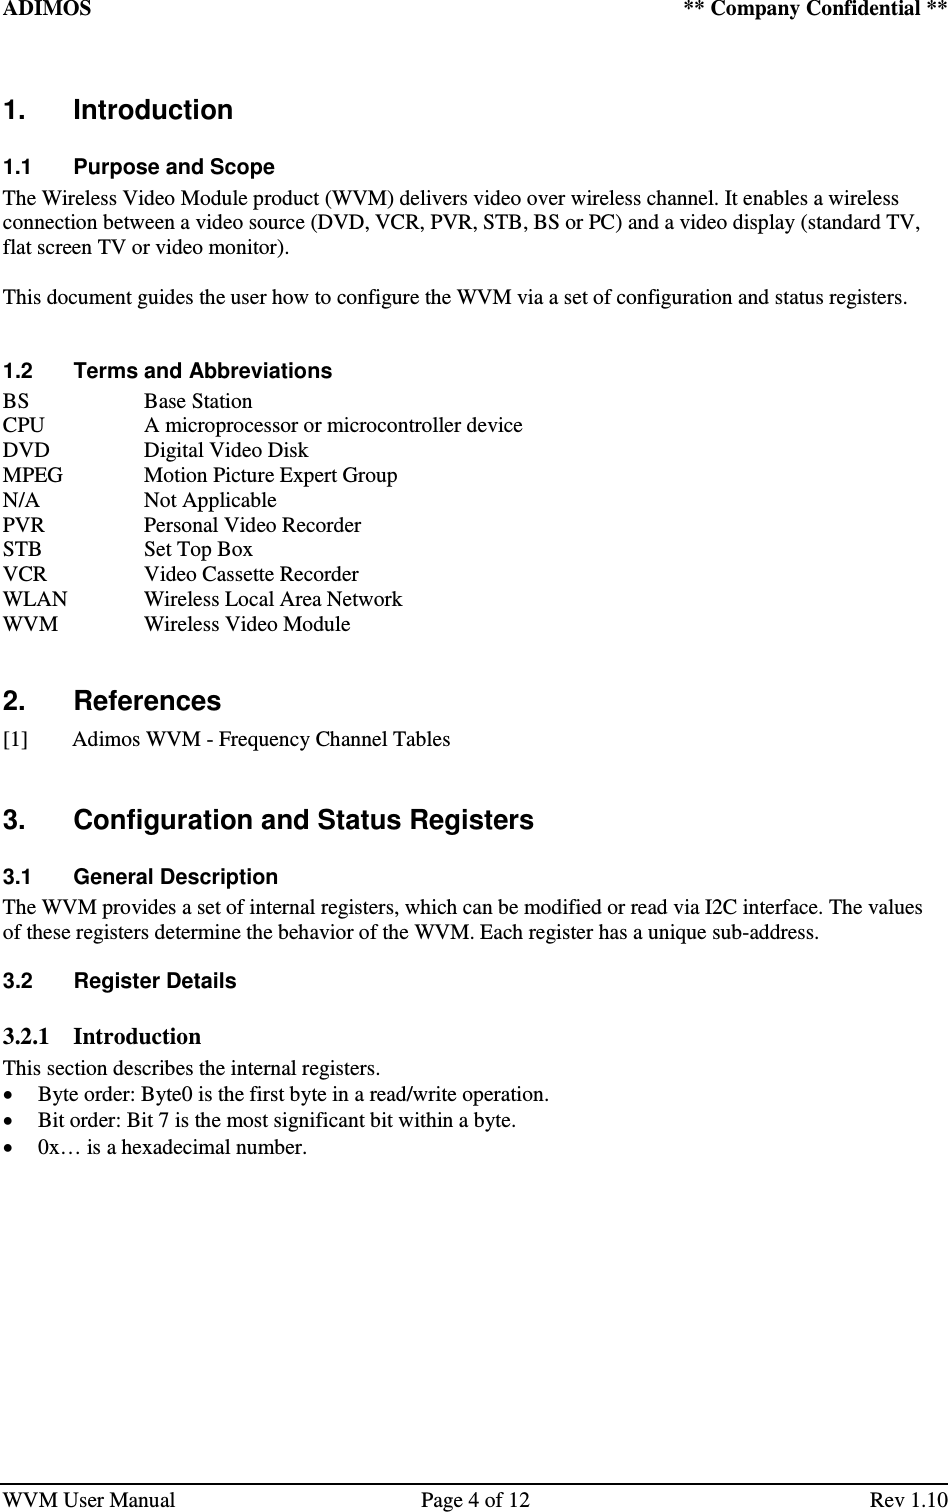 ADIMOS    ** Company Confidential **   WVM User Manual  Page 4 of 12  Rev 1.10 1.  Introduction 1.1  Purpose and Scope The Wireless Video Module product (WVM) delivers video over wireless channel. It enables a wireless connection between a video source (DVD, VCR, PVR, STB, BS or PC) and a video display (standard TV, flat screen TV or video monitor).  This document guides the user how to configure the WVM via a set of configuration and status registers.  1.2  Terms and Abbreviations BS    Base Station CPU    A microprocessor or microcontroller device DVD    Digital Video Disk MPEG    Motion Picture Expert Group N/A    Not Applicable PVR    Personal Video Recorder STB    Set Top Box VCR    Video Cassette Recorder WLAN   Wireless Local Area Network WVM    Wireless Video Module  2.  References [1] Adimos WVM - Frequency Channel Tables  3.  Configuration and Status Registers 3.1  General Description The WVM provides a set of internal registers, which can be modified or read via I2C interface. The values of these registers determine the behavior of the WVM. Each register has a unique sub-address. 3.2  Register Details 3.2.1 Introduction This section describes the internal registers.  Byte order: Byte0 is the first byte in a read/write operation.  Bit order: Bit 7 is the most significant bit within a byte.  0x… is a hexadecimal number.   